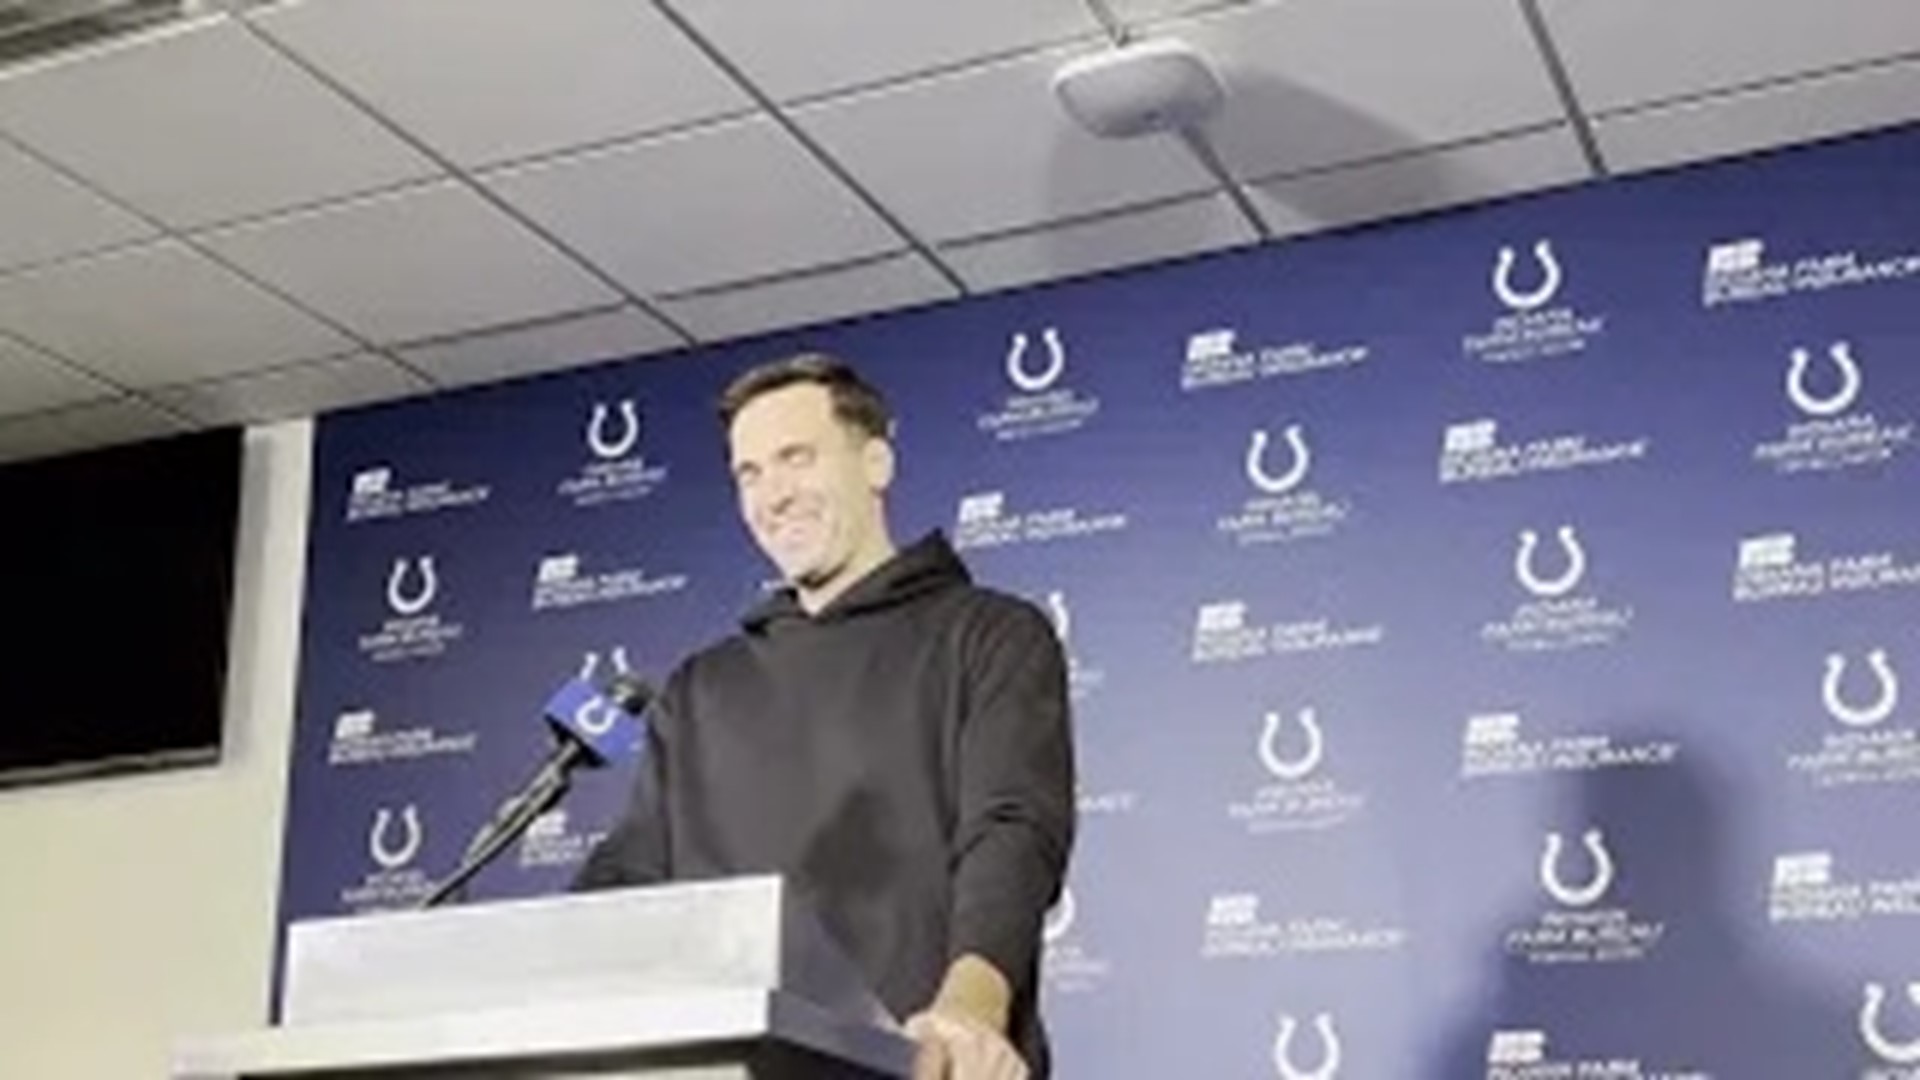 New Indianapolis Colts QB Joe Flacco spoke with media after signing his contract and discussed his stance on mentoring young QBs.